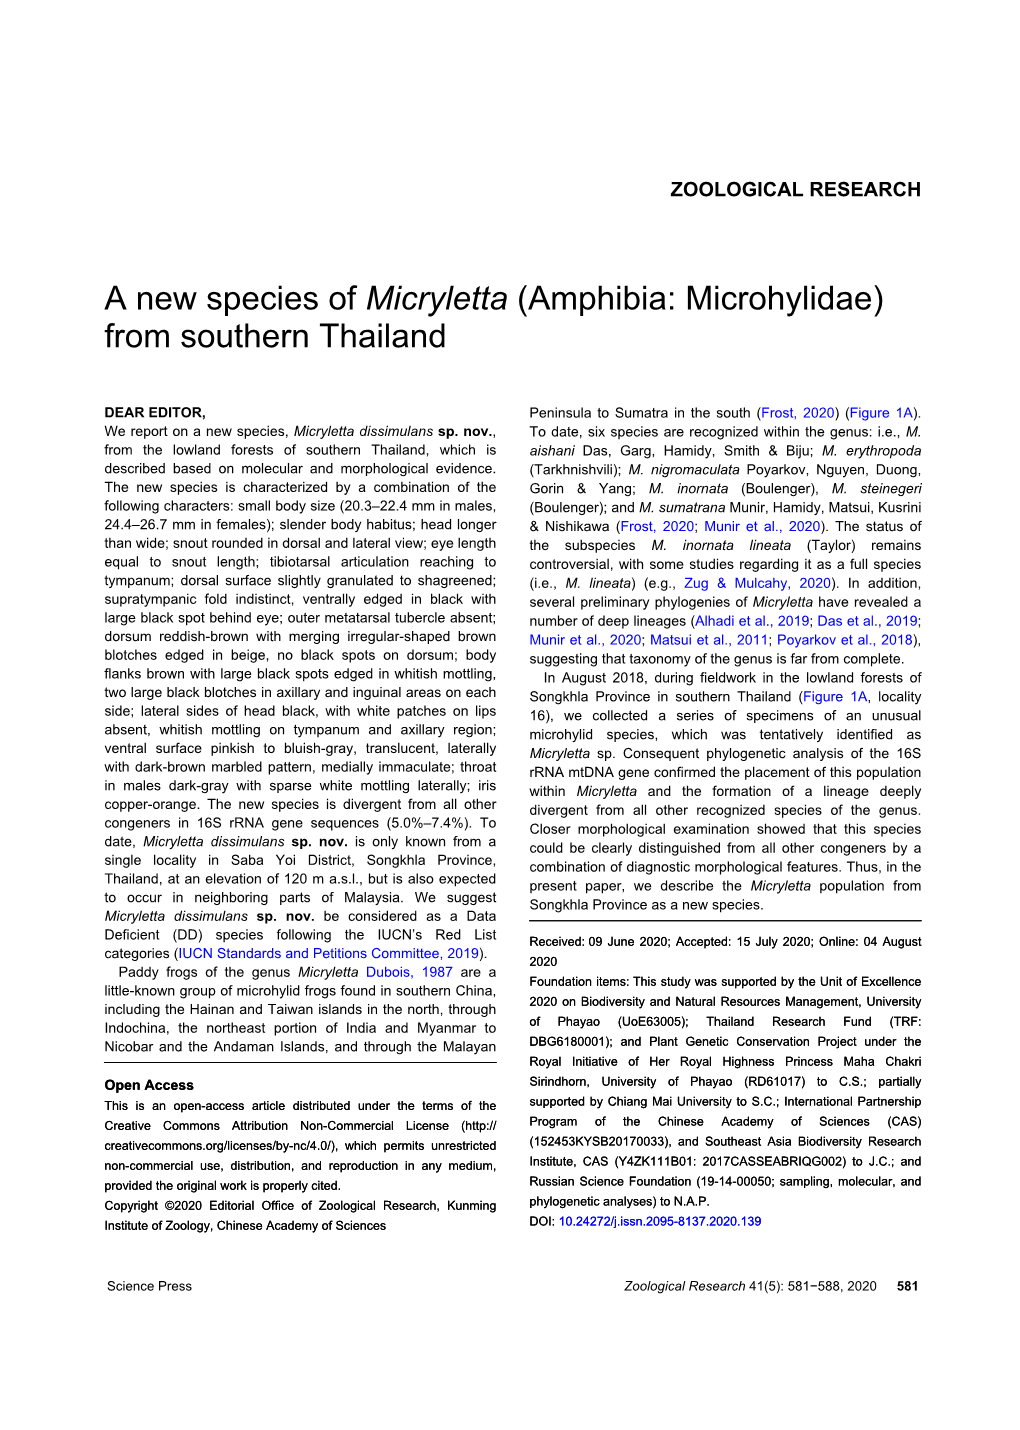 A New Species of Micryletta (Amphibia: Microhylidae) from Southern Thailand